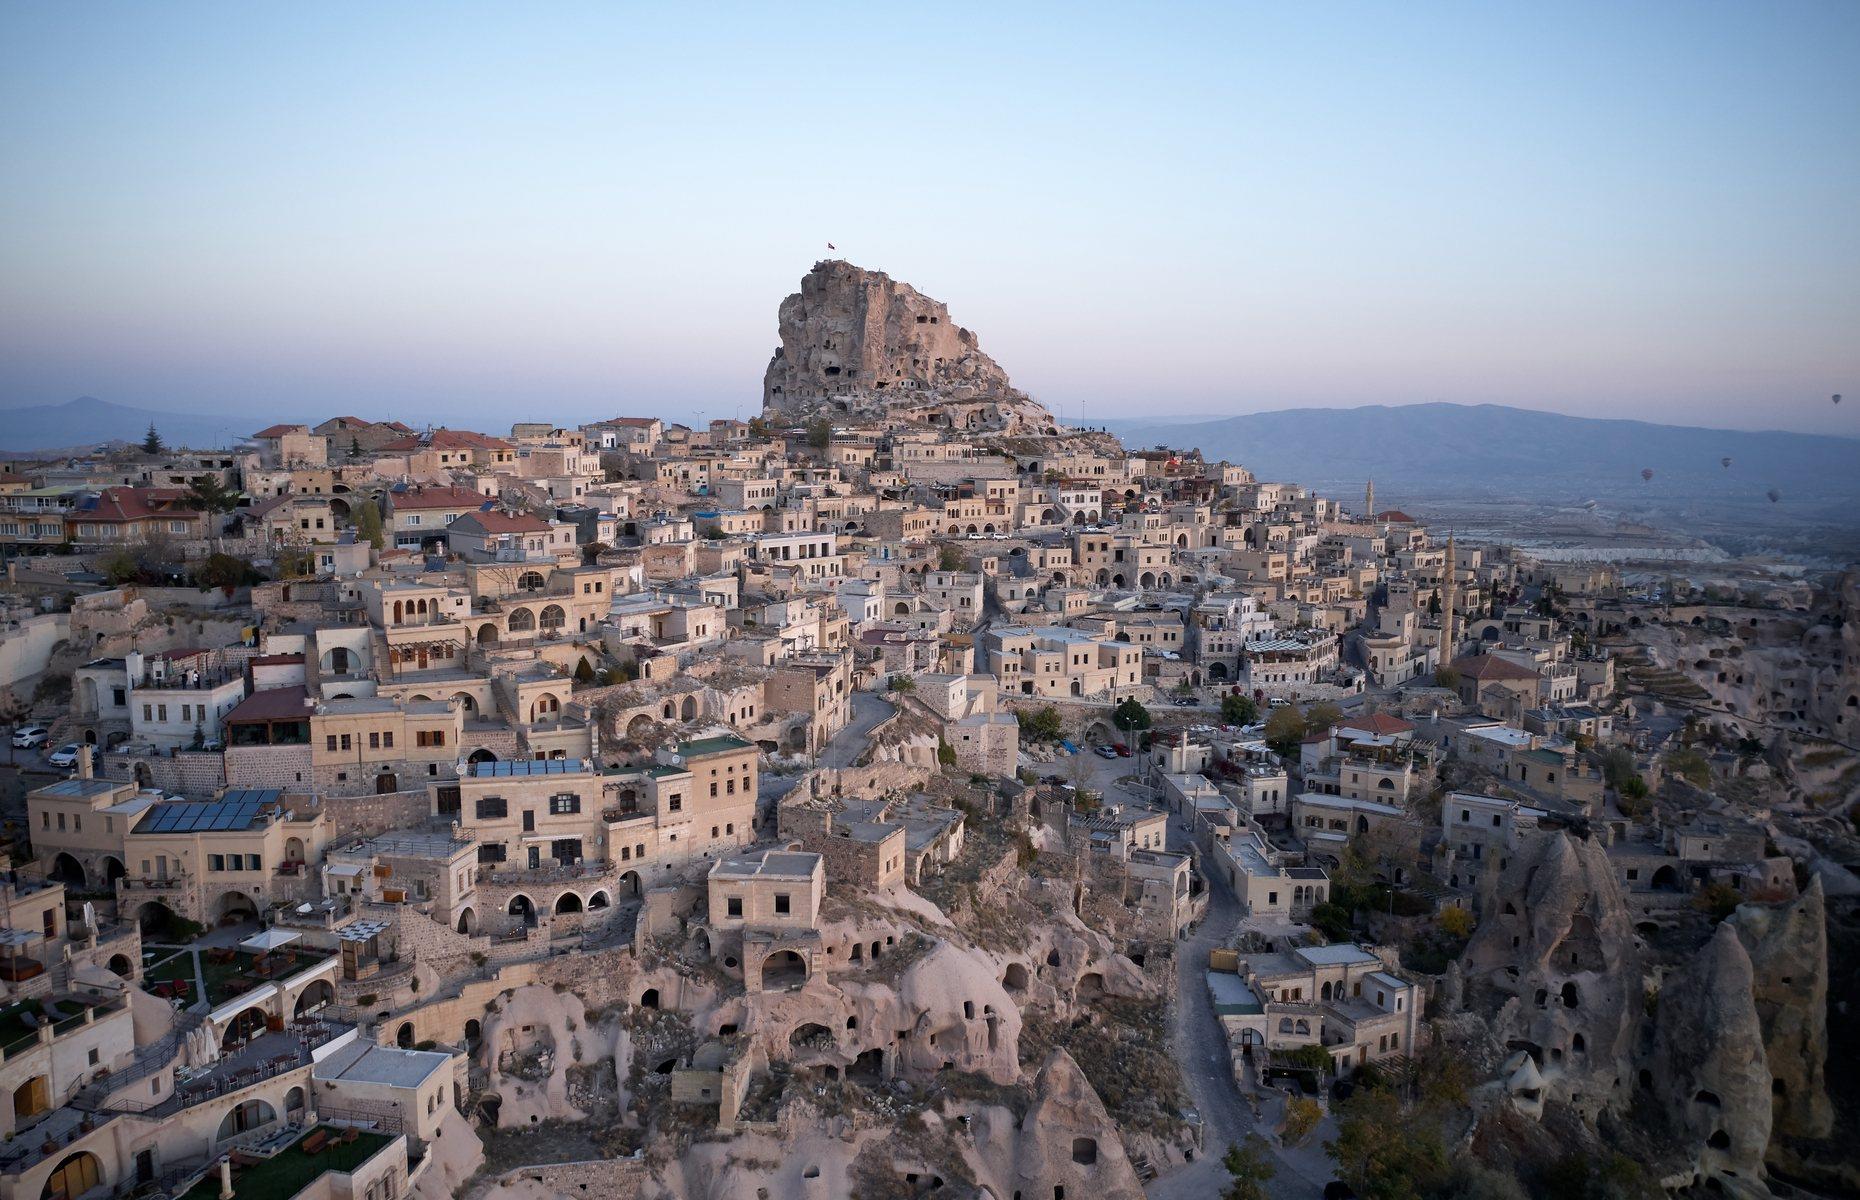 There’s something otherworldly about Ortahisar, a rustic town located in Turkey’s Cappadocia region. Its best-known feature is the historic fortress, built onto one of the region’s iconic “fairy chimneys” (rock columns), which has steadily eroded away during the past few centuries. Besides this, Ortahisar’s patchwork of stone houses and caves, melding seamlessly with the rock face, have an almost model-village feel.